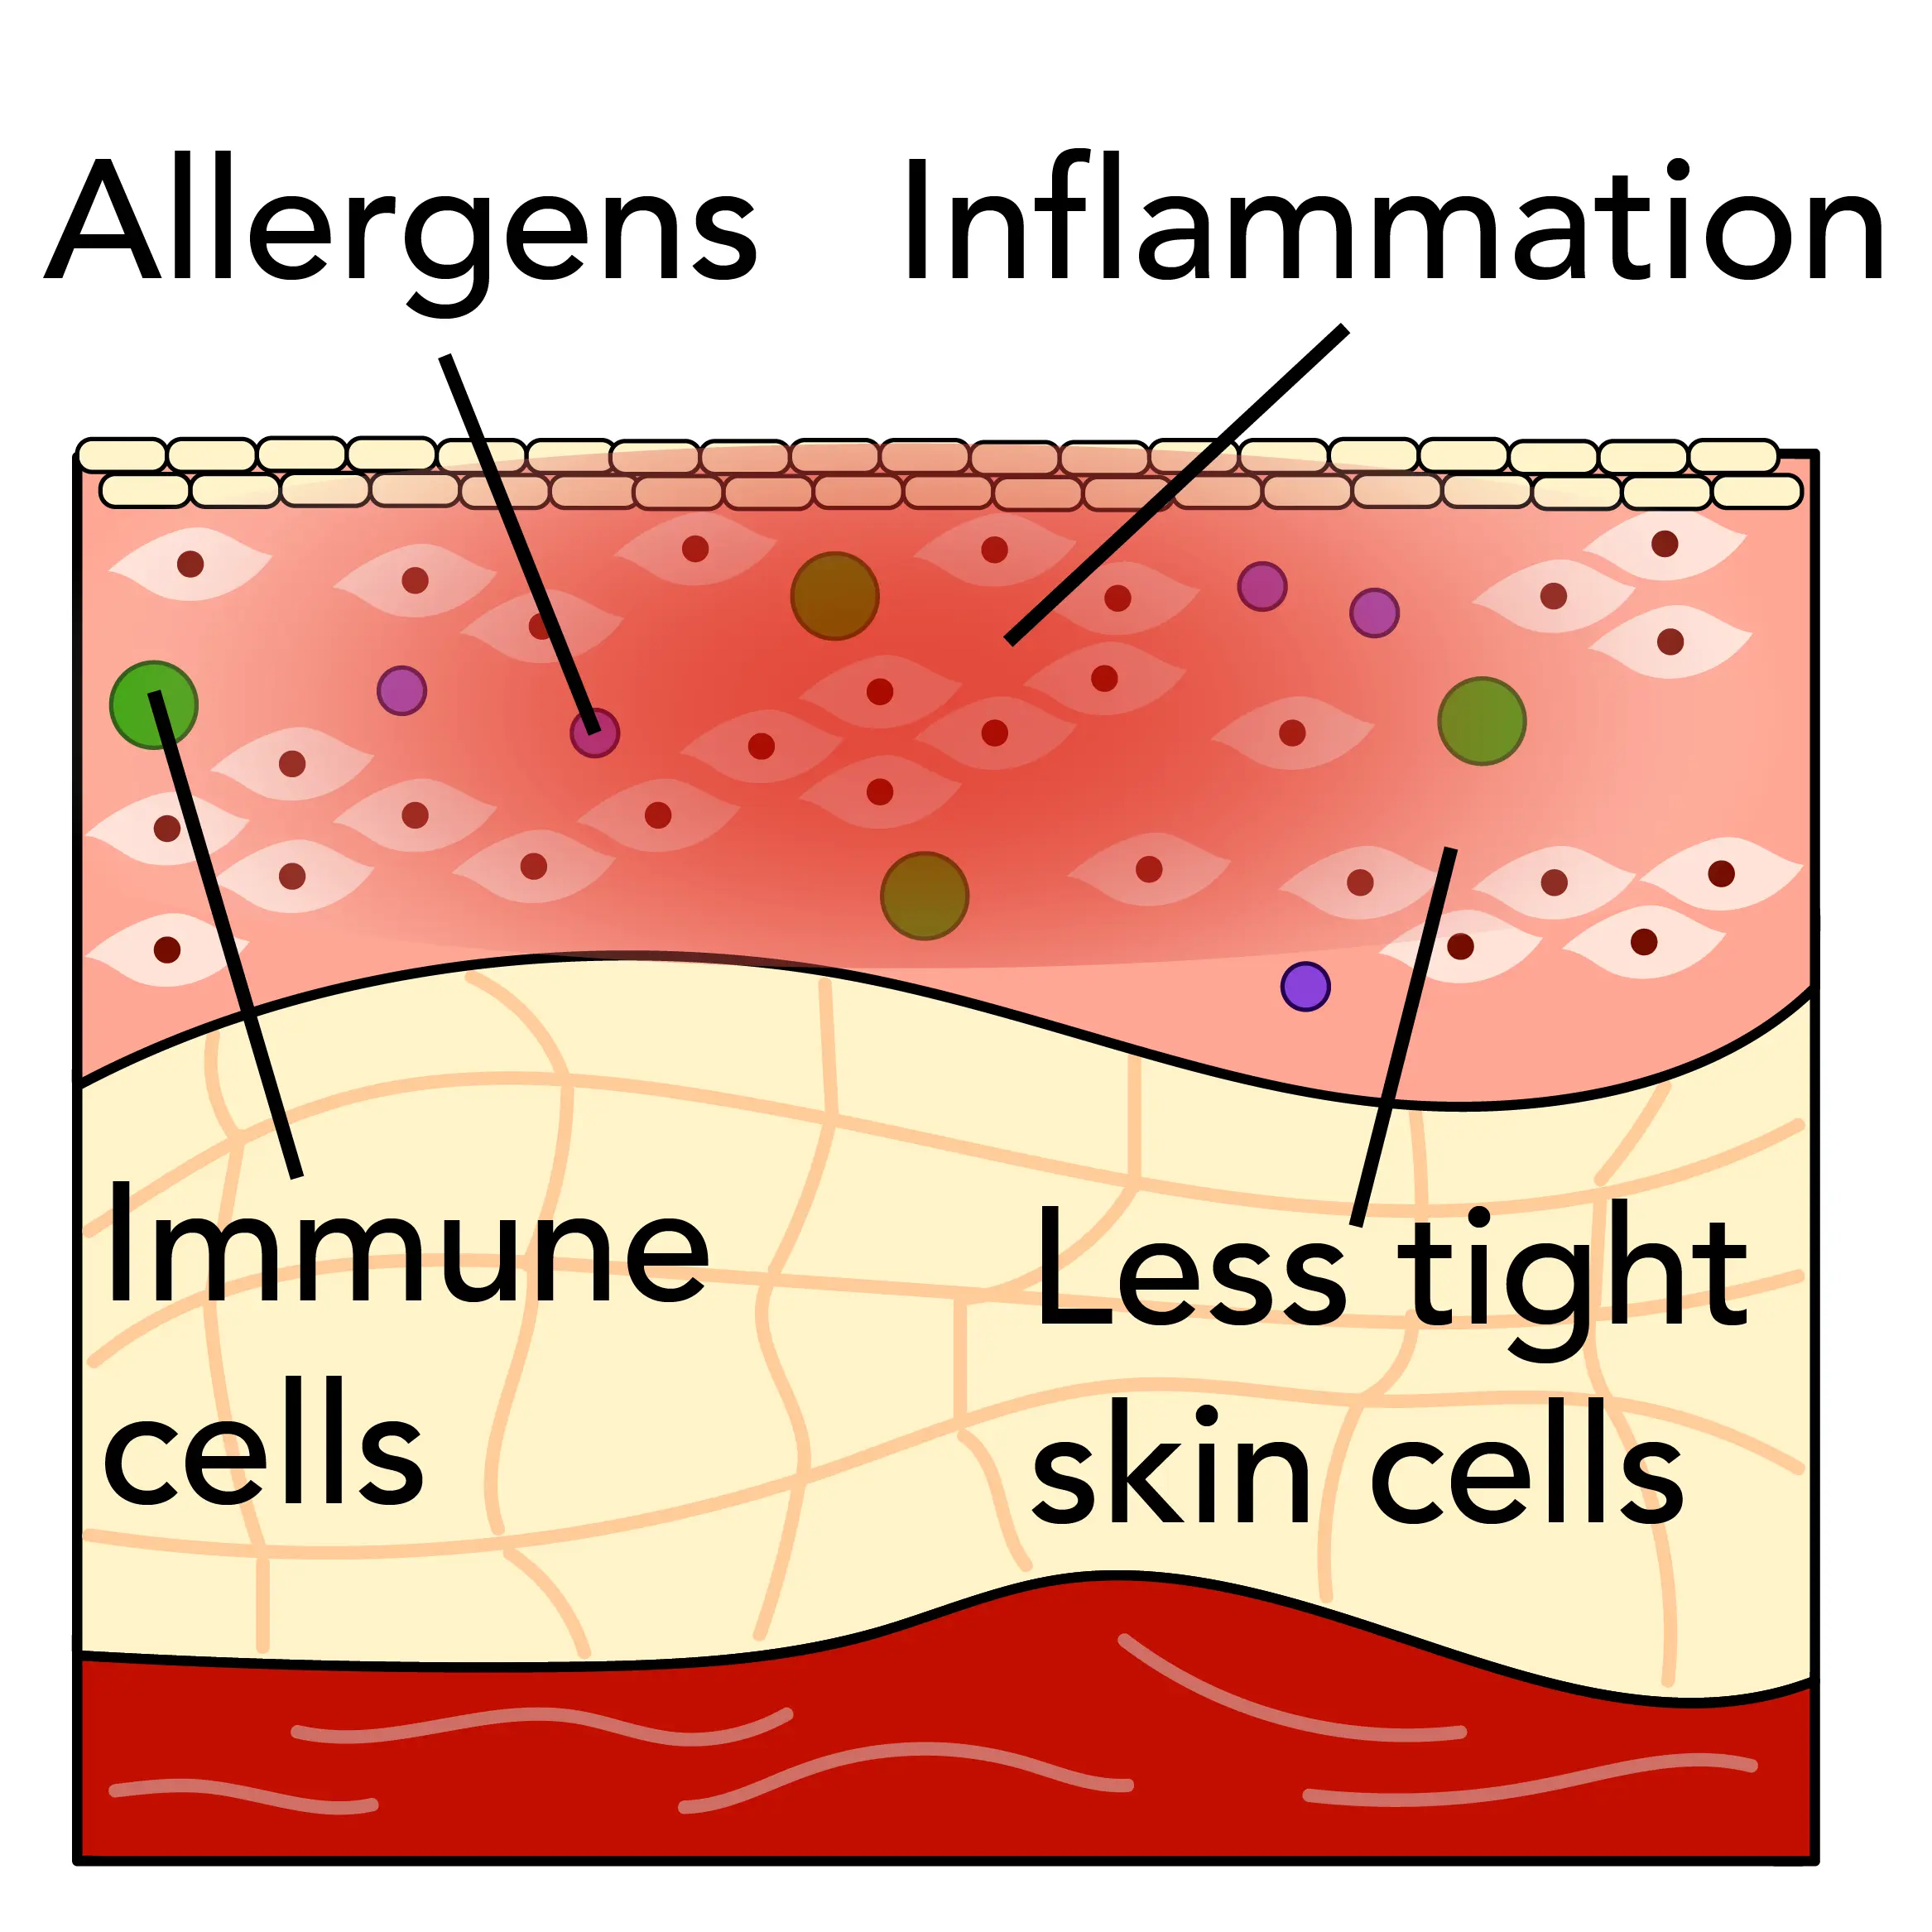 Atopic dermatitis is caused by immune cells in the skin that respond to contact with allergens.